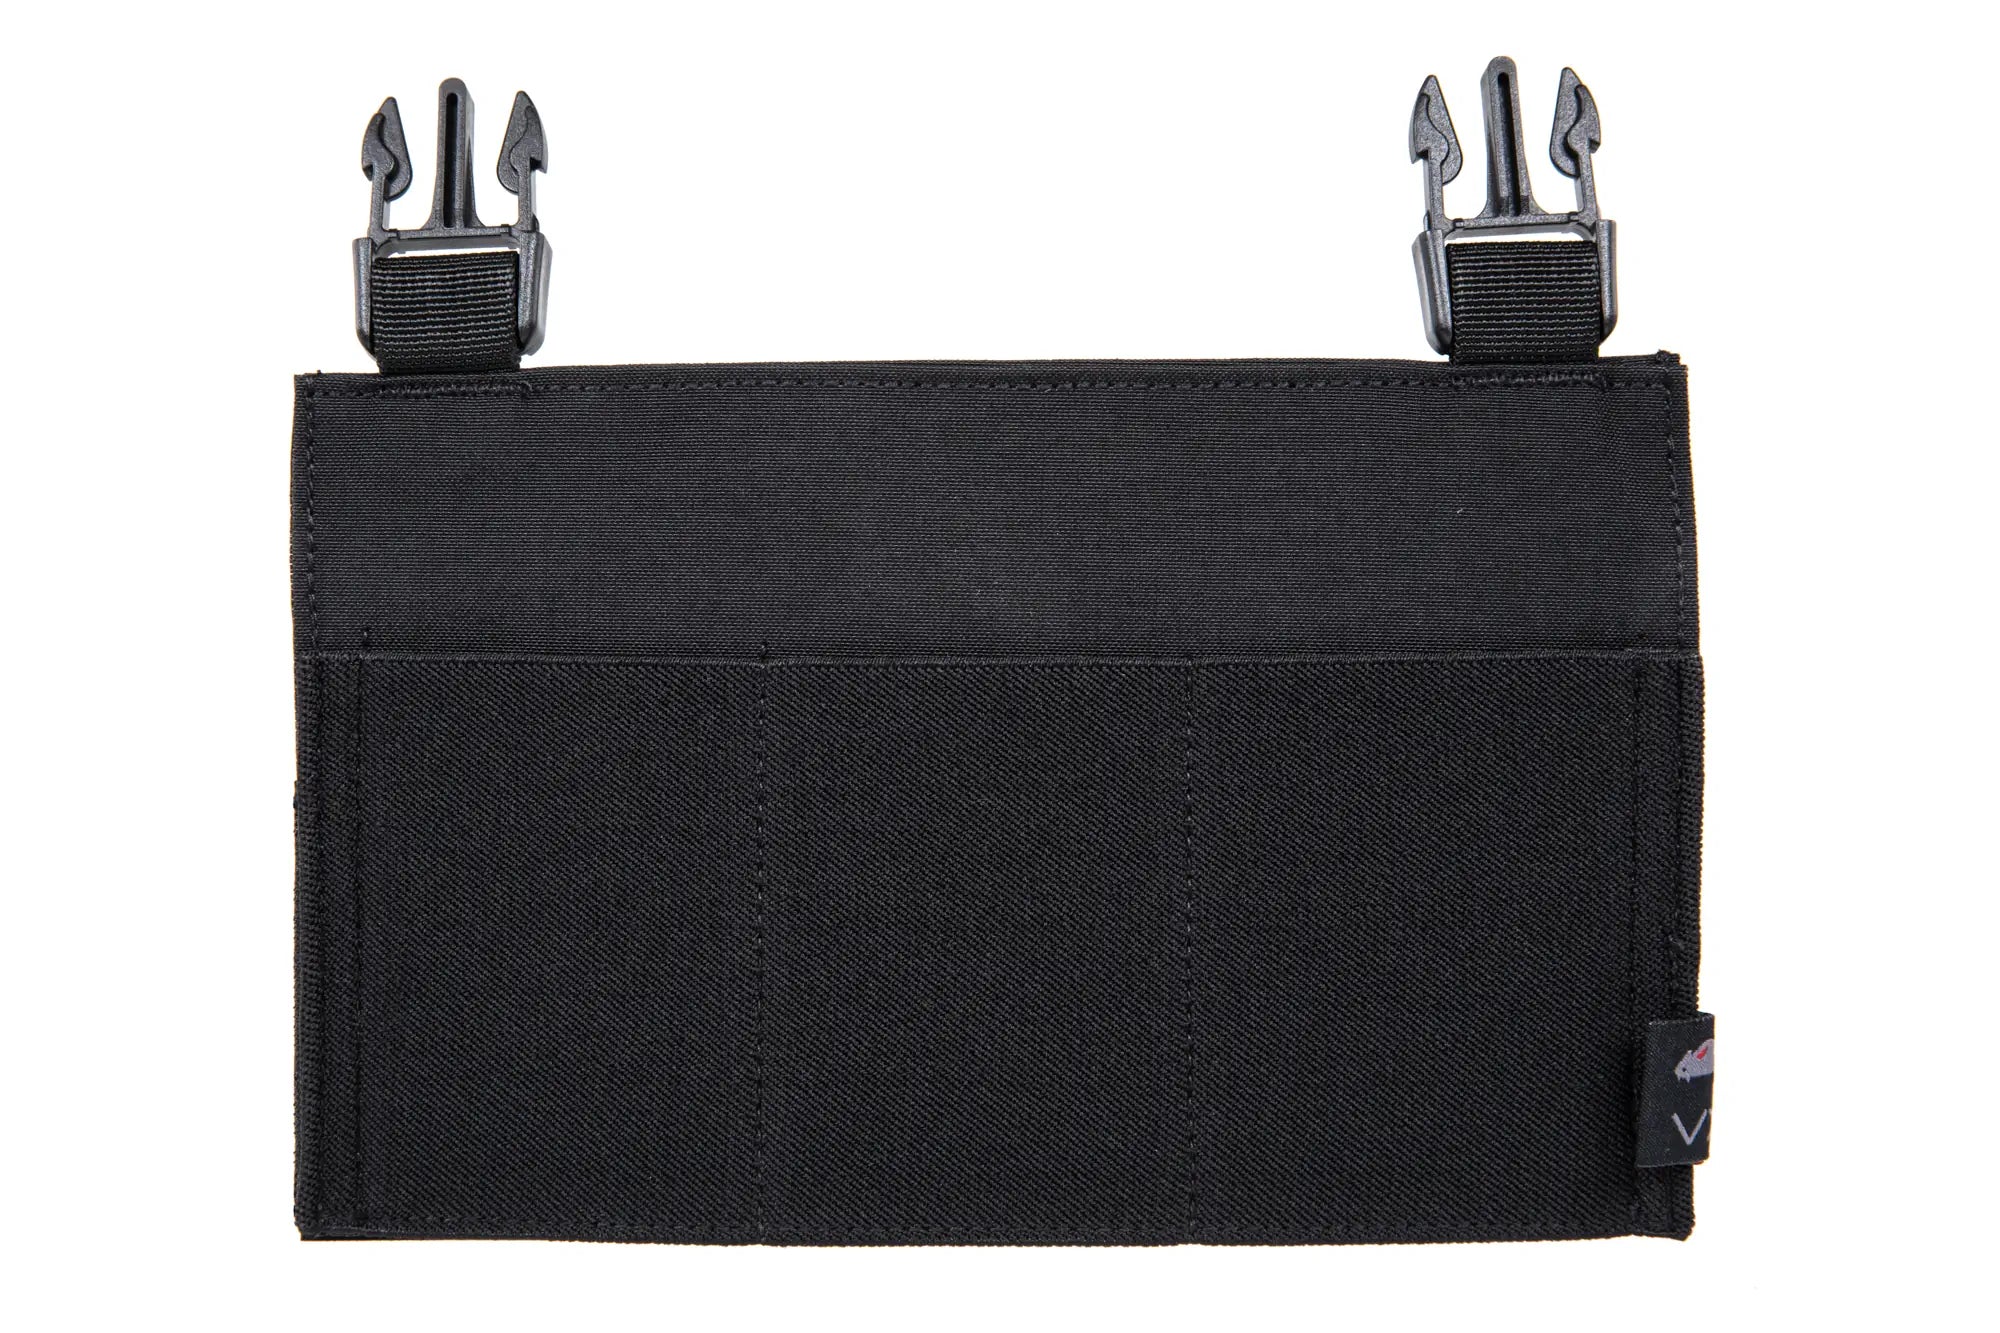 Viper Tactical VX buckle up panel for 3 AR/AK magazines - Black-1